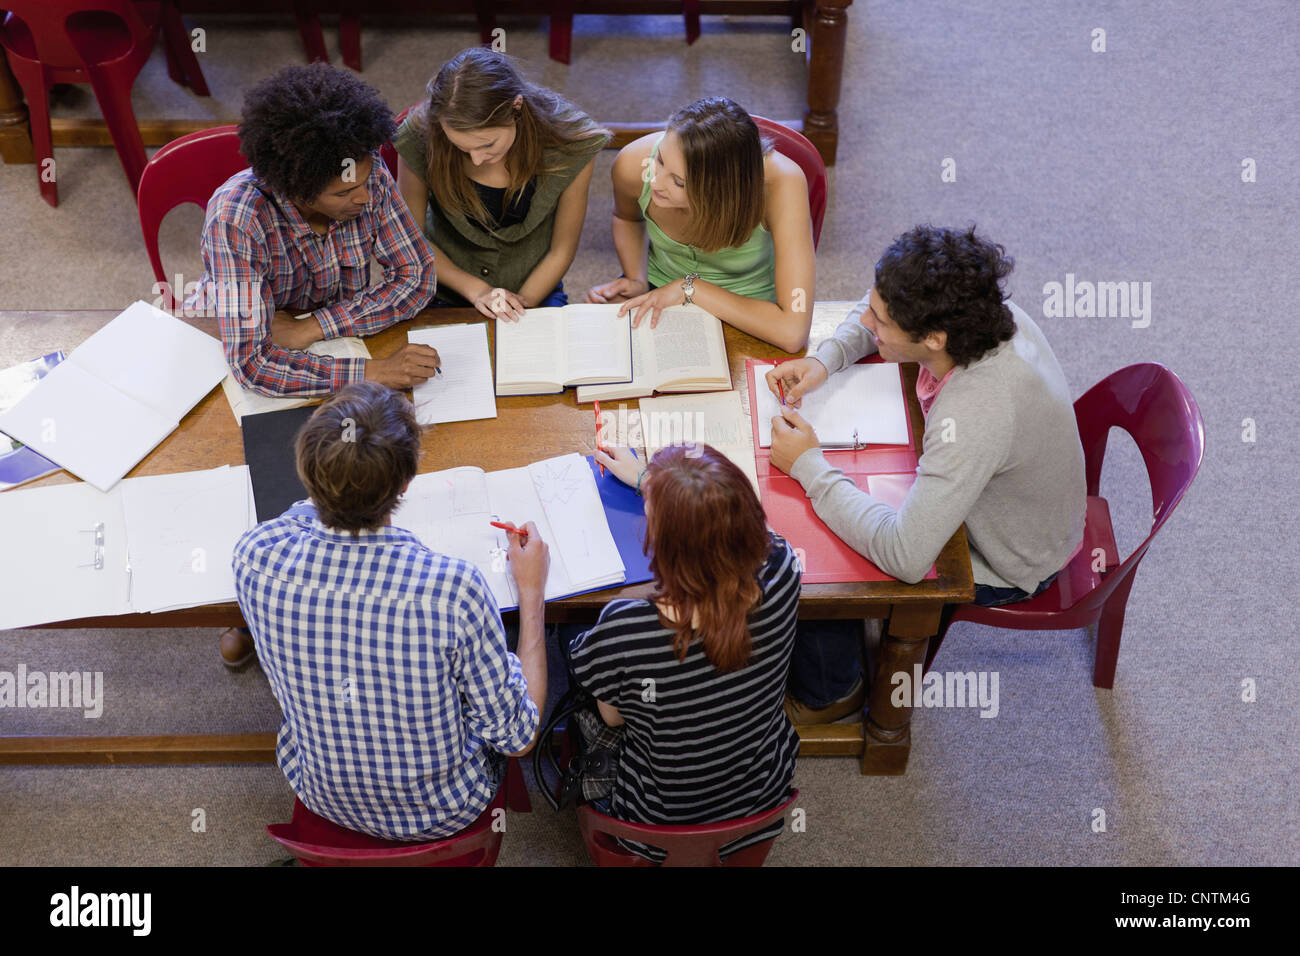 Students studying together in library Stock Photo